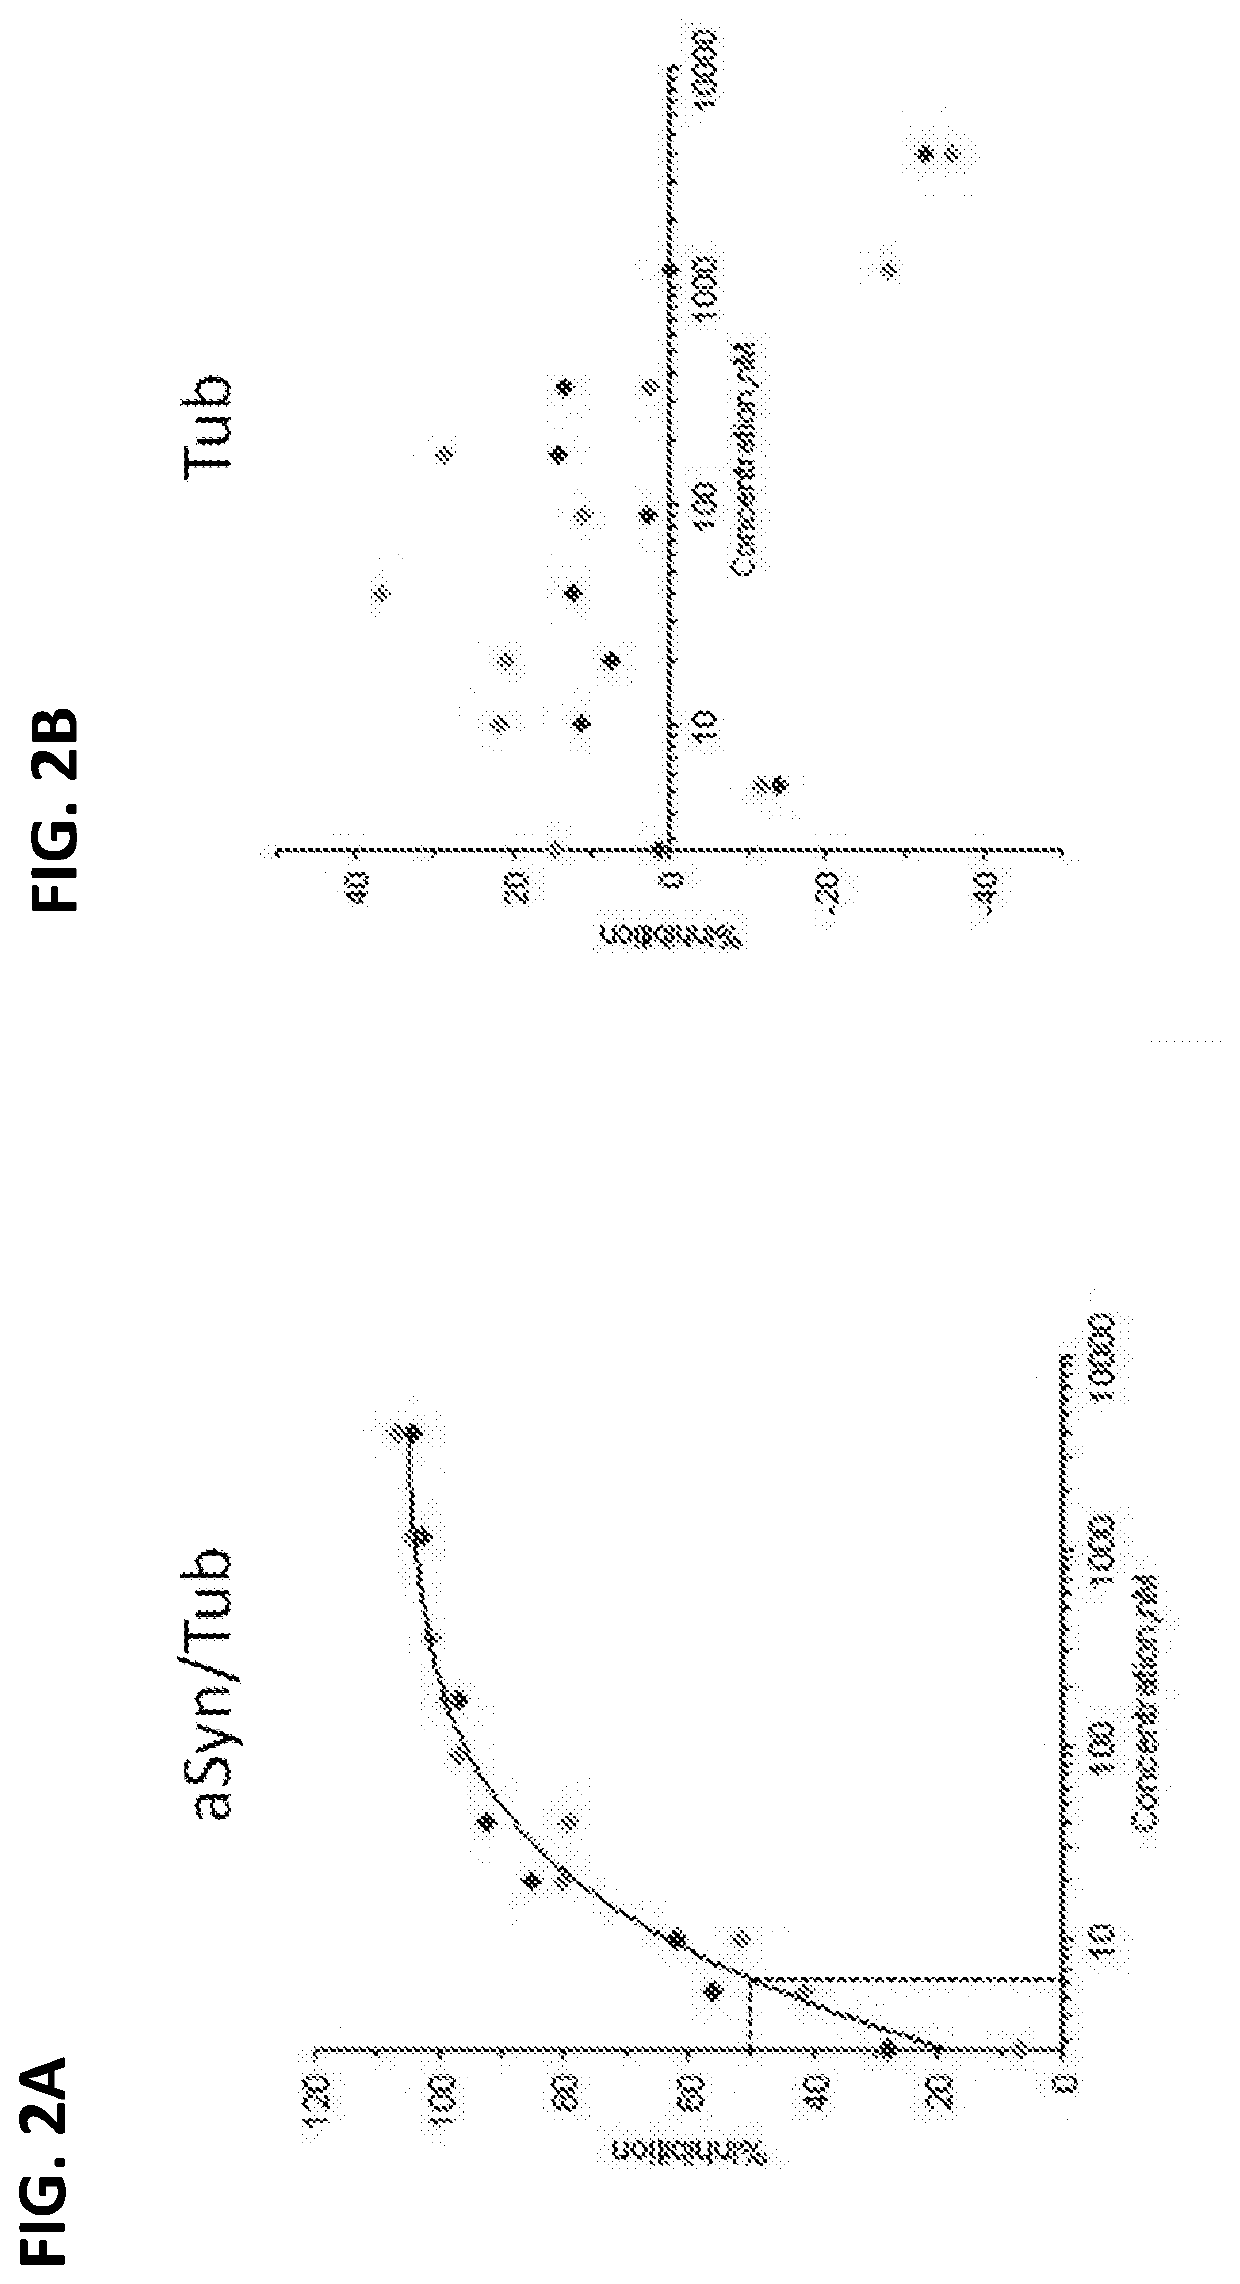 Antisense oligonucleotides targeting alpha-synuclein and uses thereof